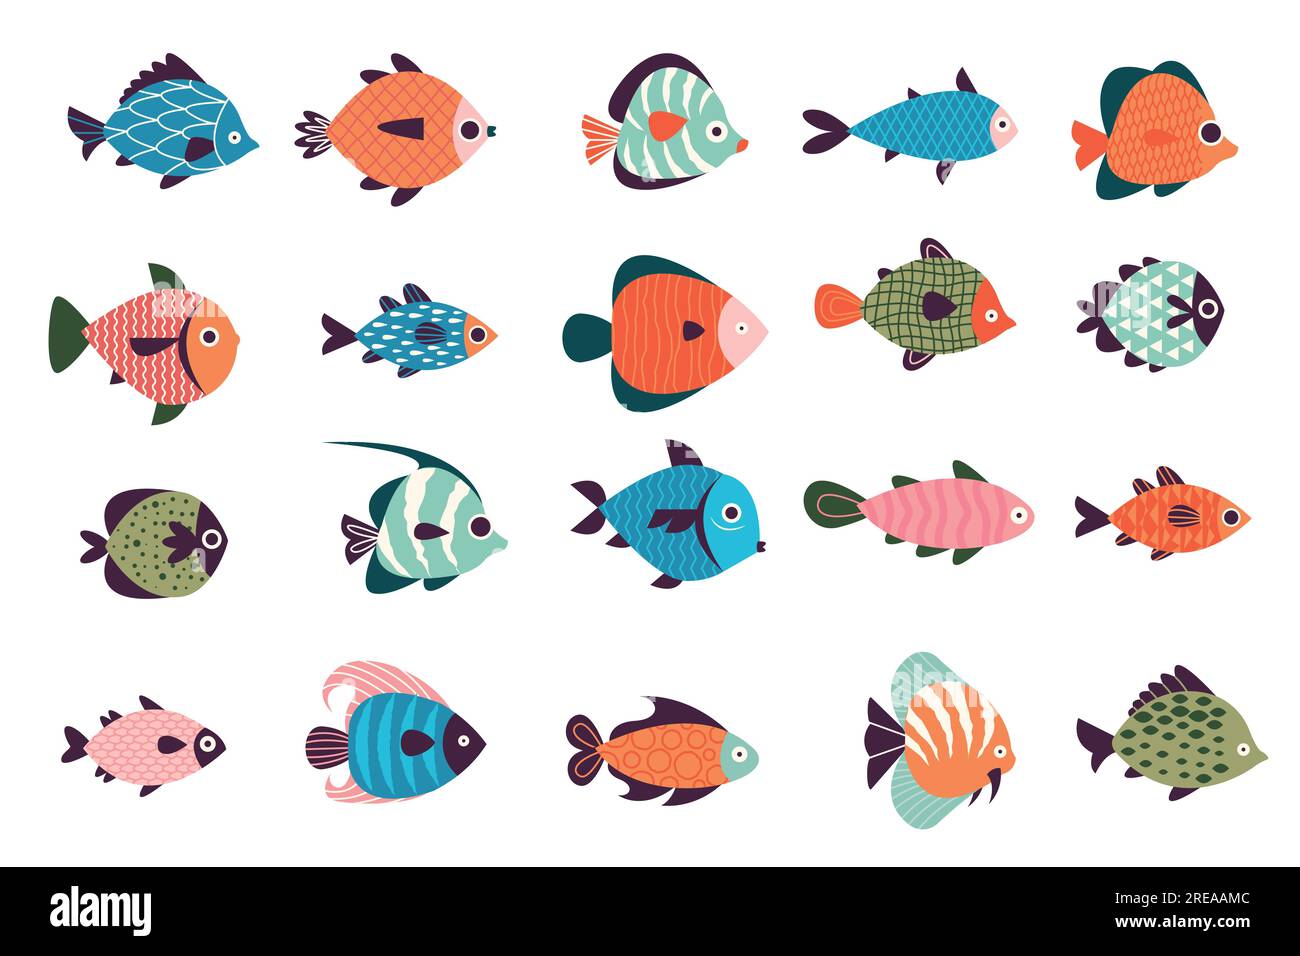 Zoo fish Cut Out Stock Images & Pictures - Alamy